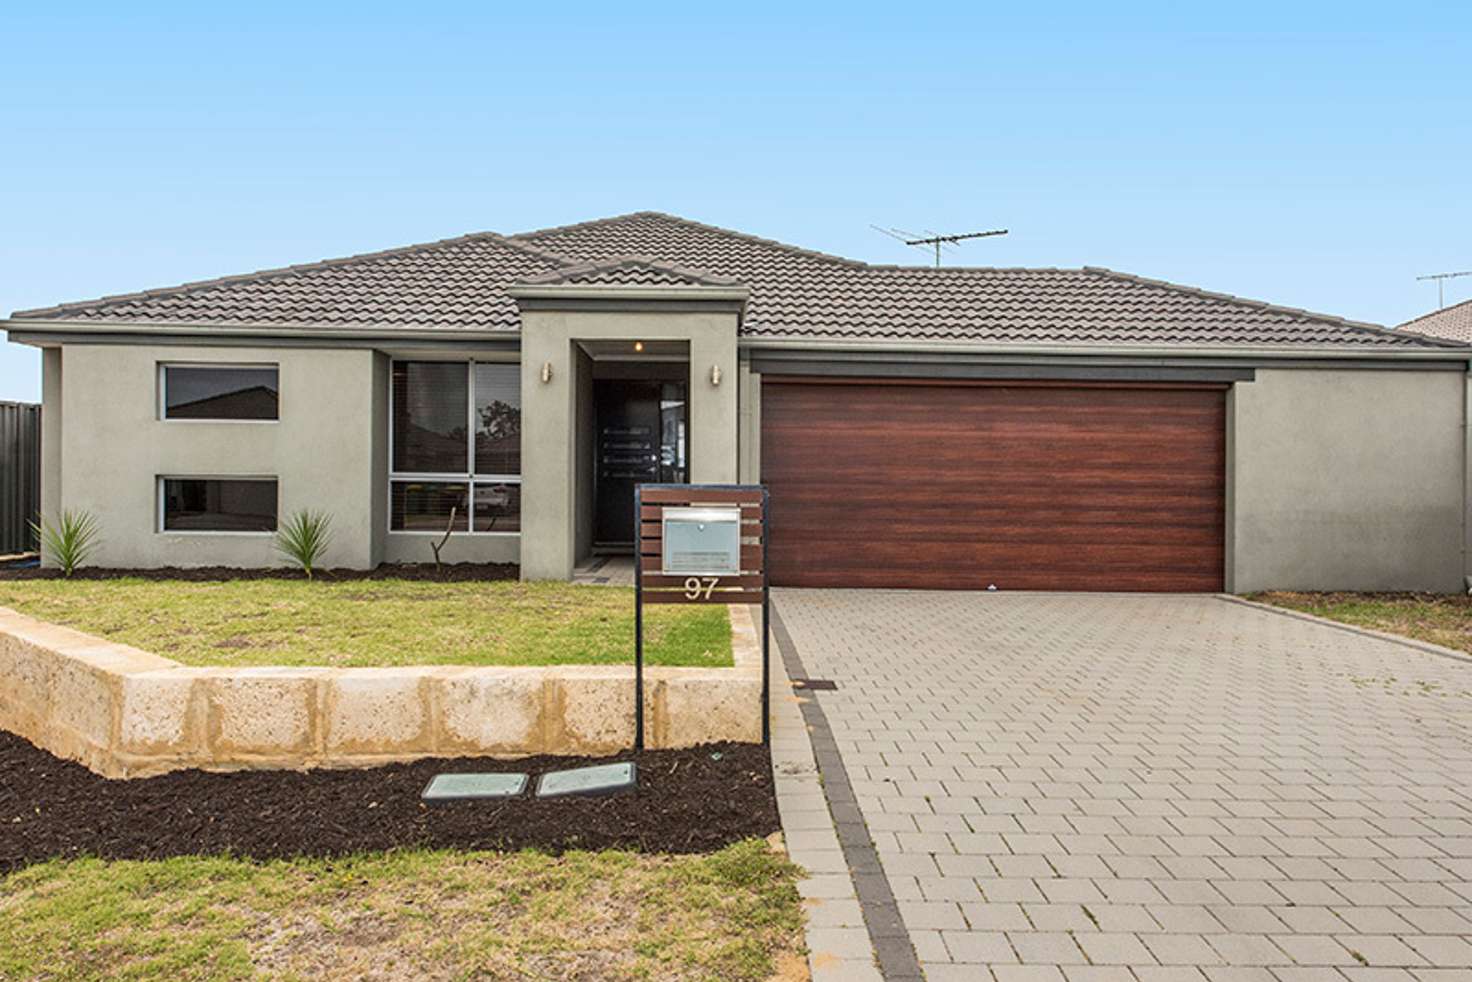 Main view of Homely house listing, 97 Smirk Road, Baldivis WA 6171